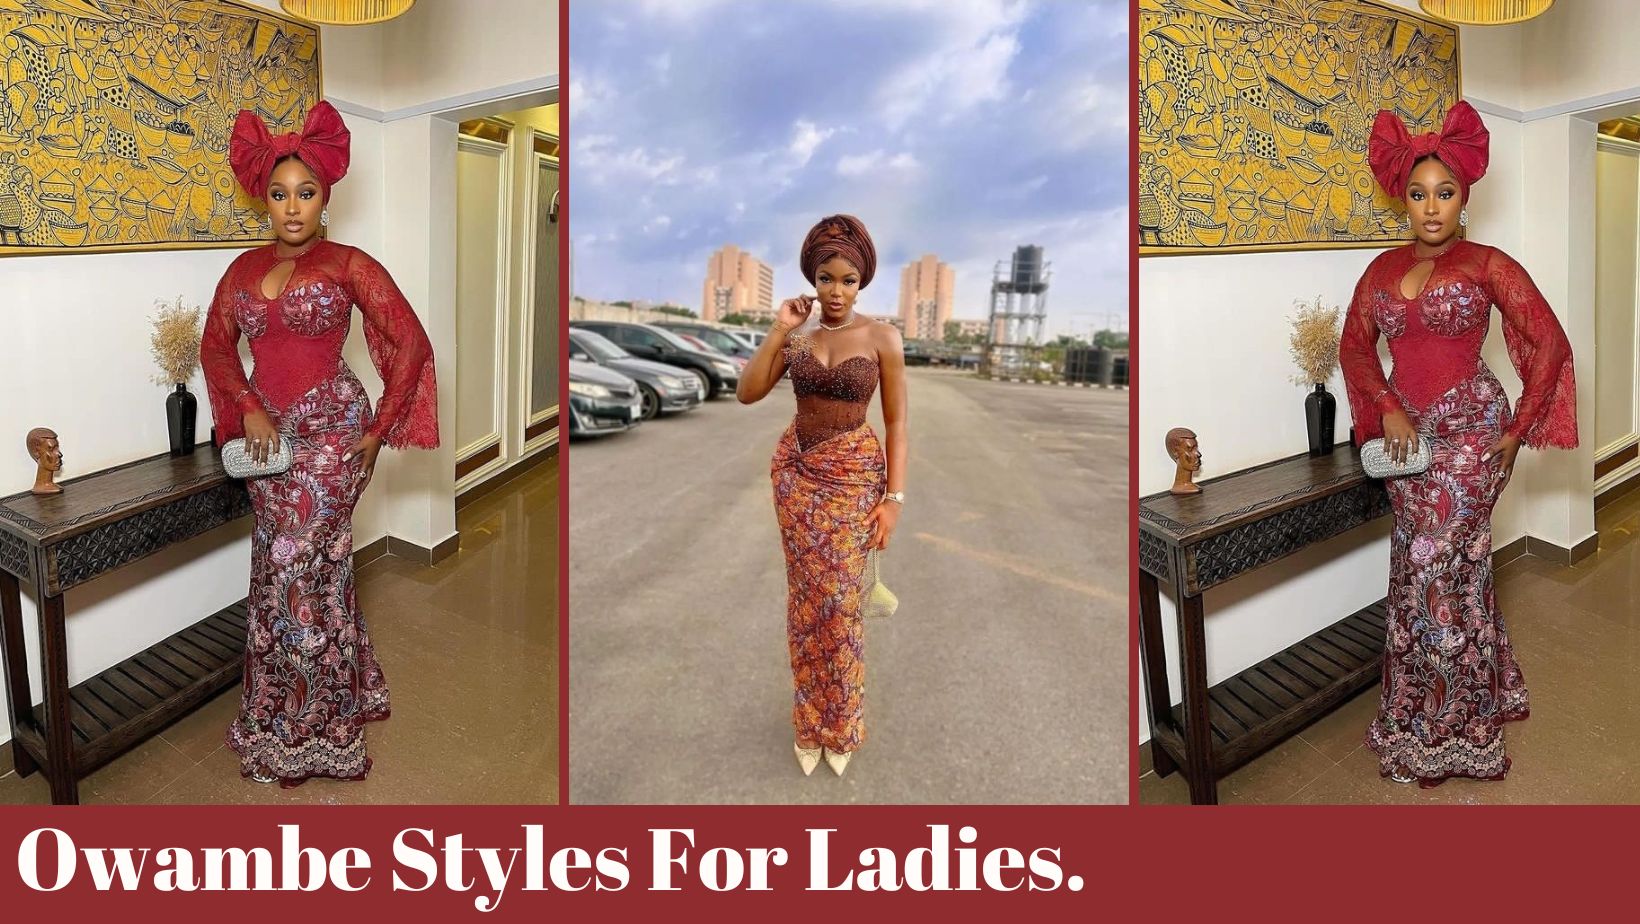 Owambe Styles For Ladies.